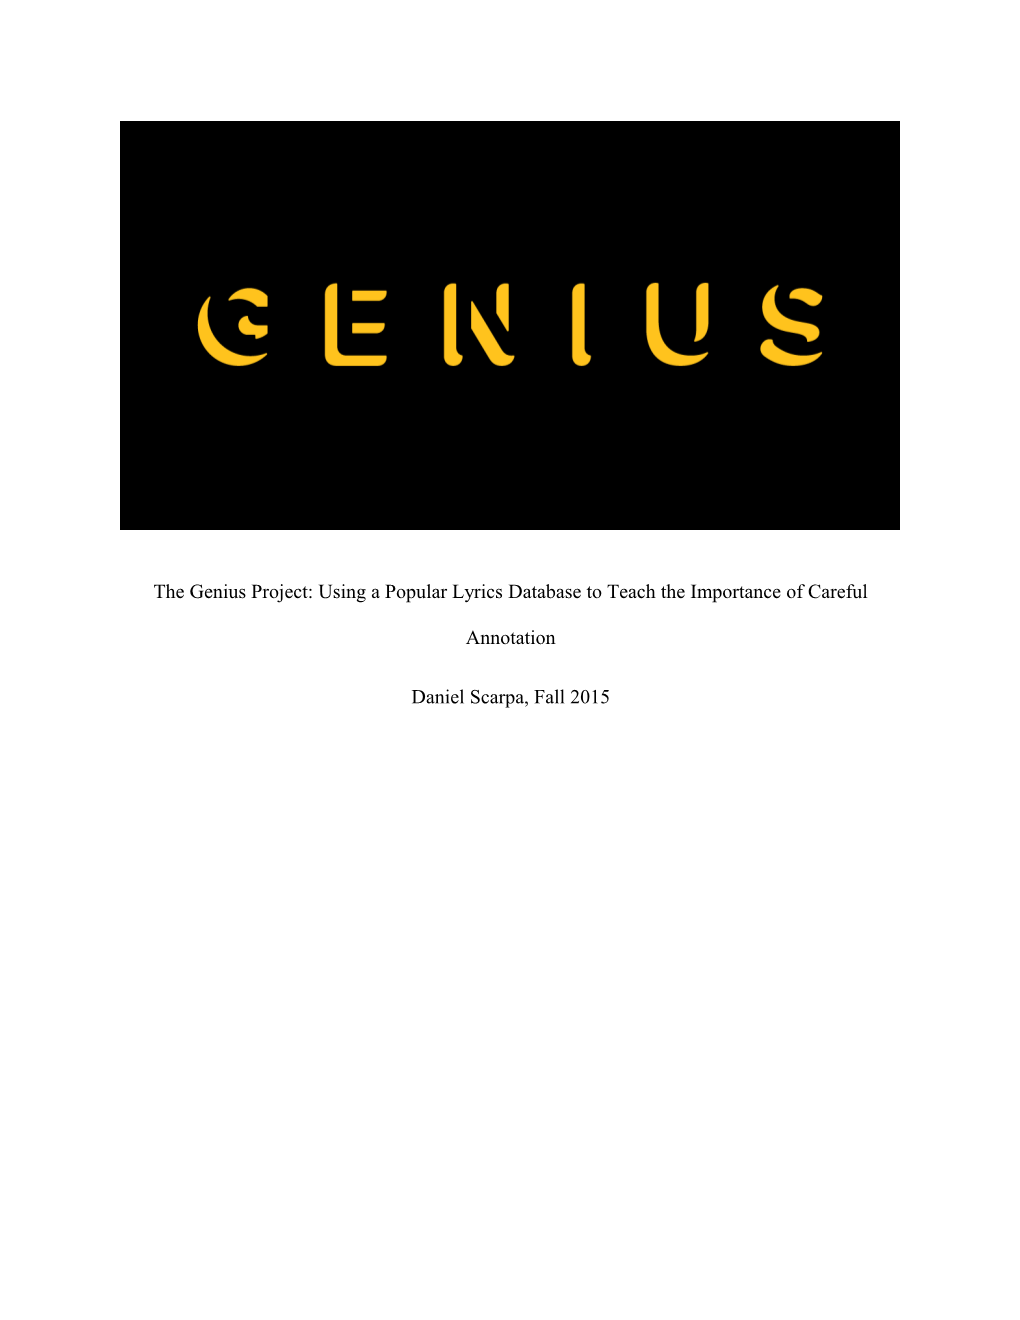 The Genius Project: Using a Popular Lyrics Database to Teach the Importance of Careful